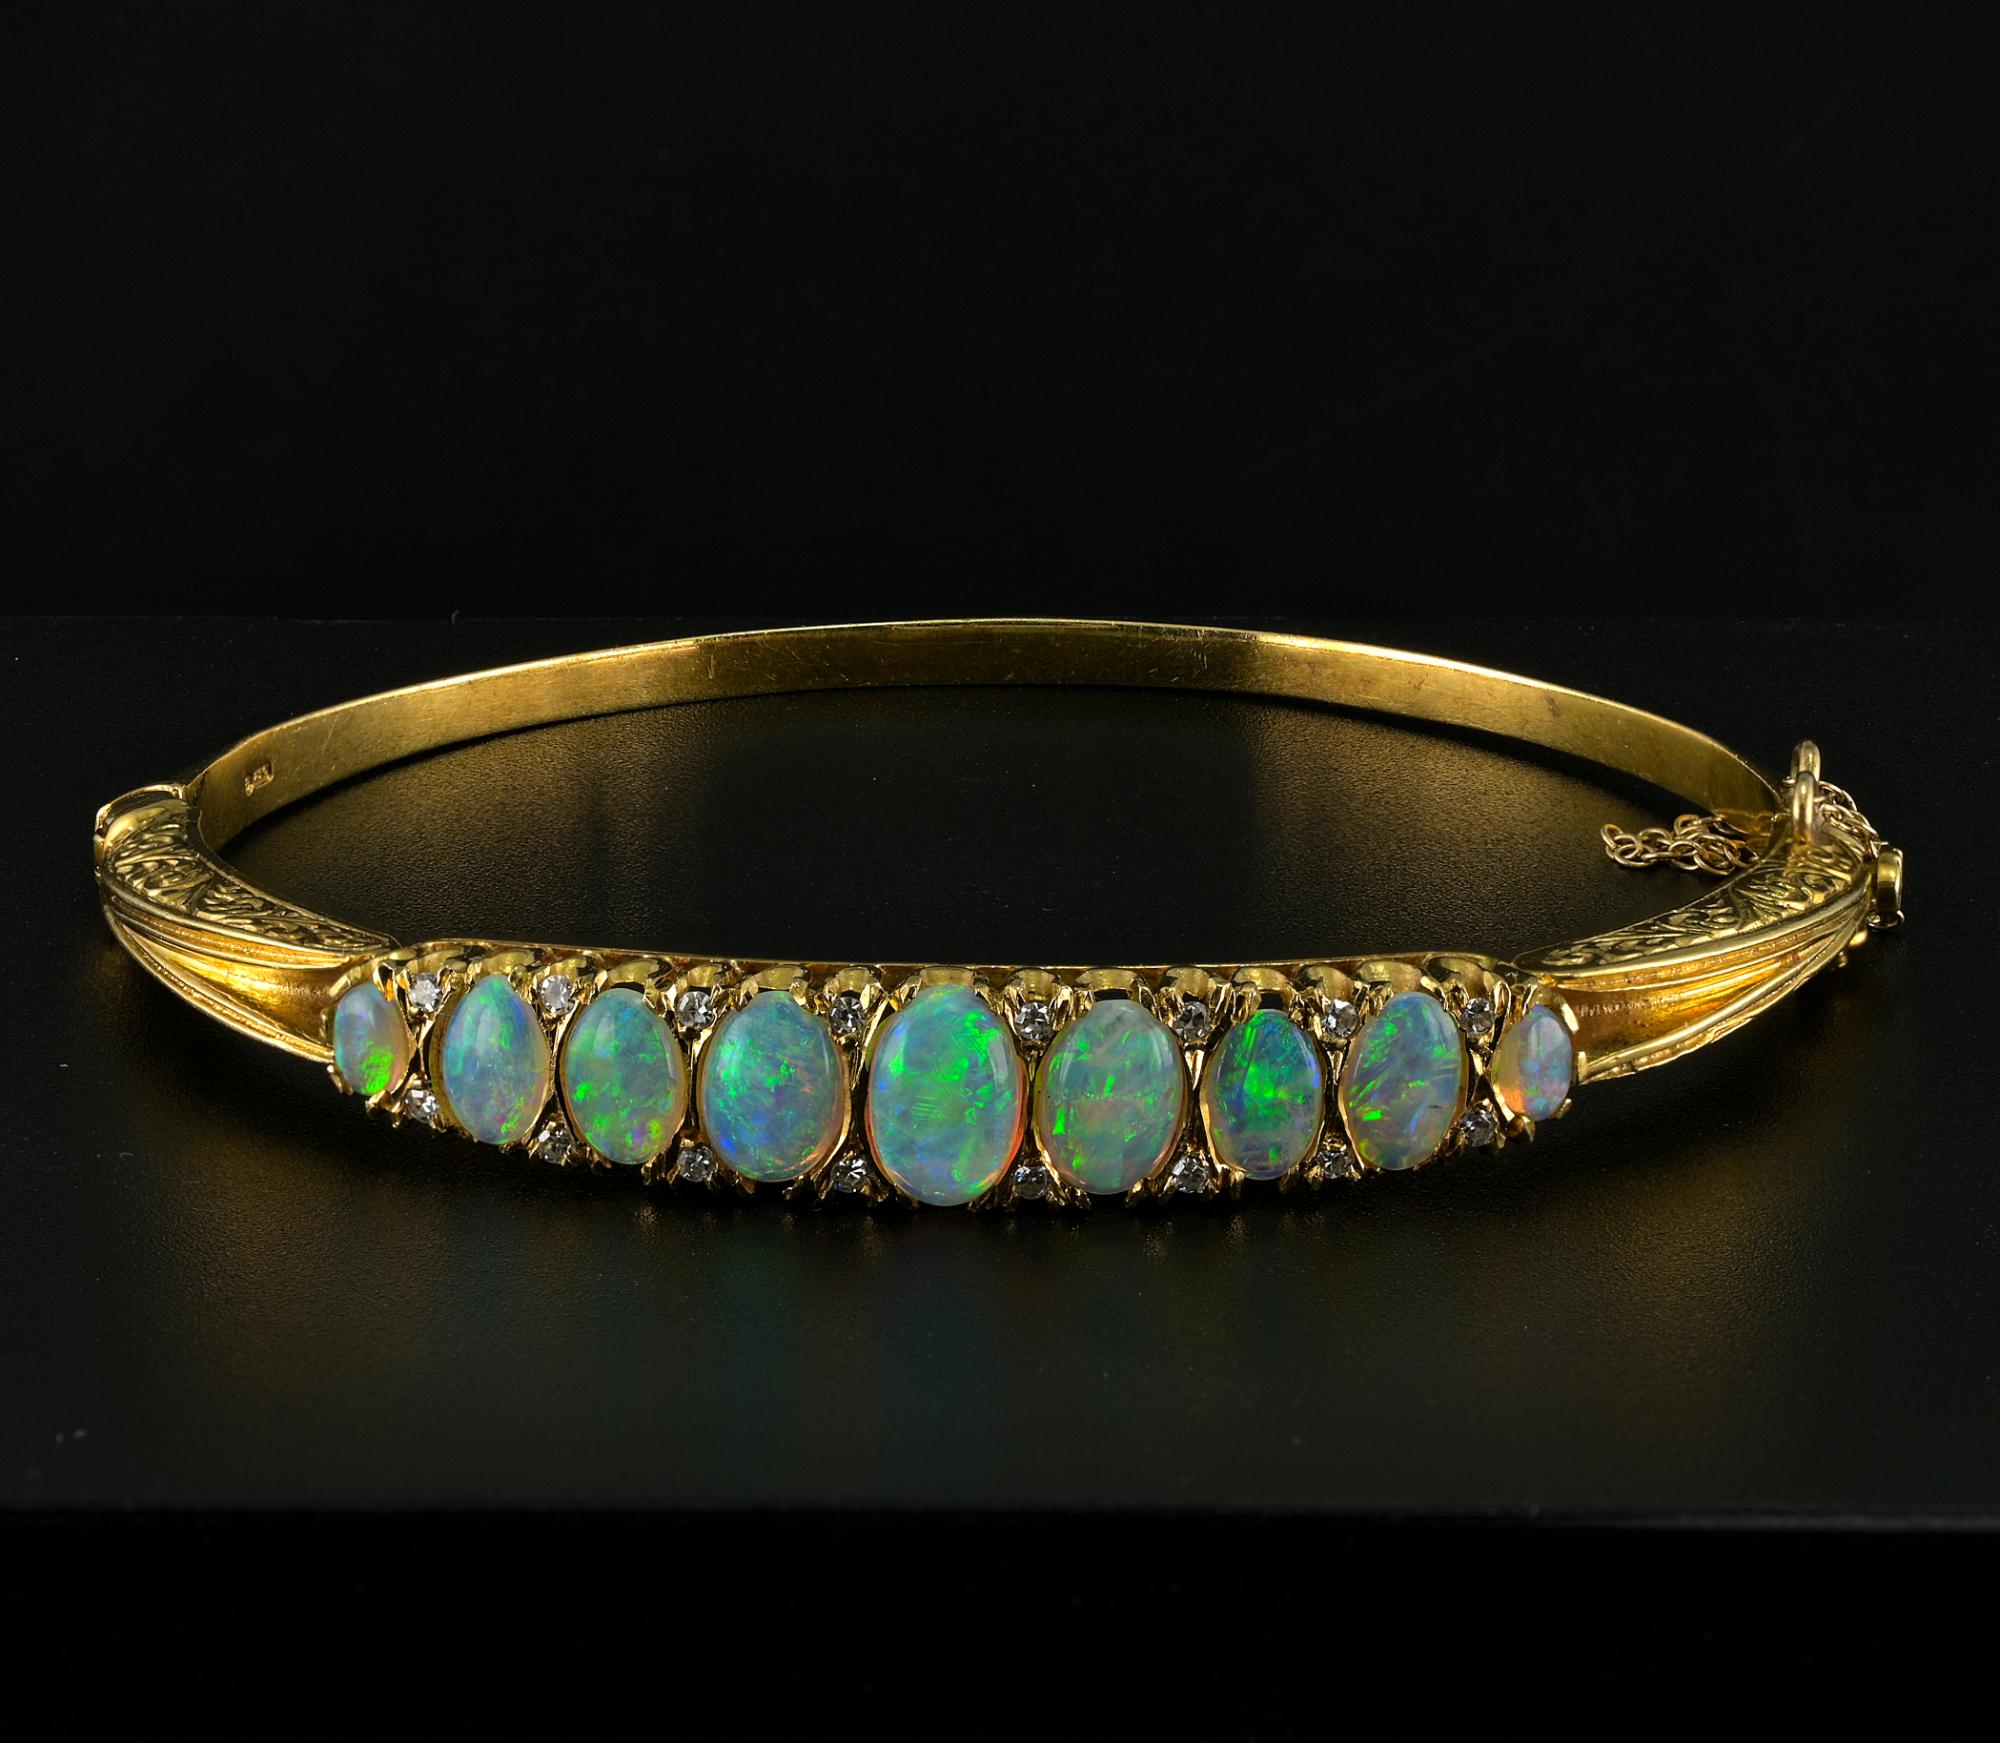 This outstanding English Victorian Style bangle is a vintage dated 1988 London – bearing full english hallmarks 18 KT
Stunning carving scroll work embracing the center graduated array of 9 natural Australian Opals with all spectrum of rainbow vivid